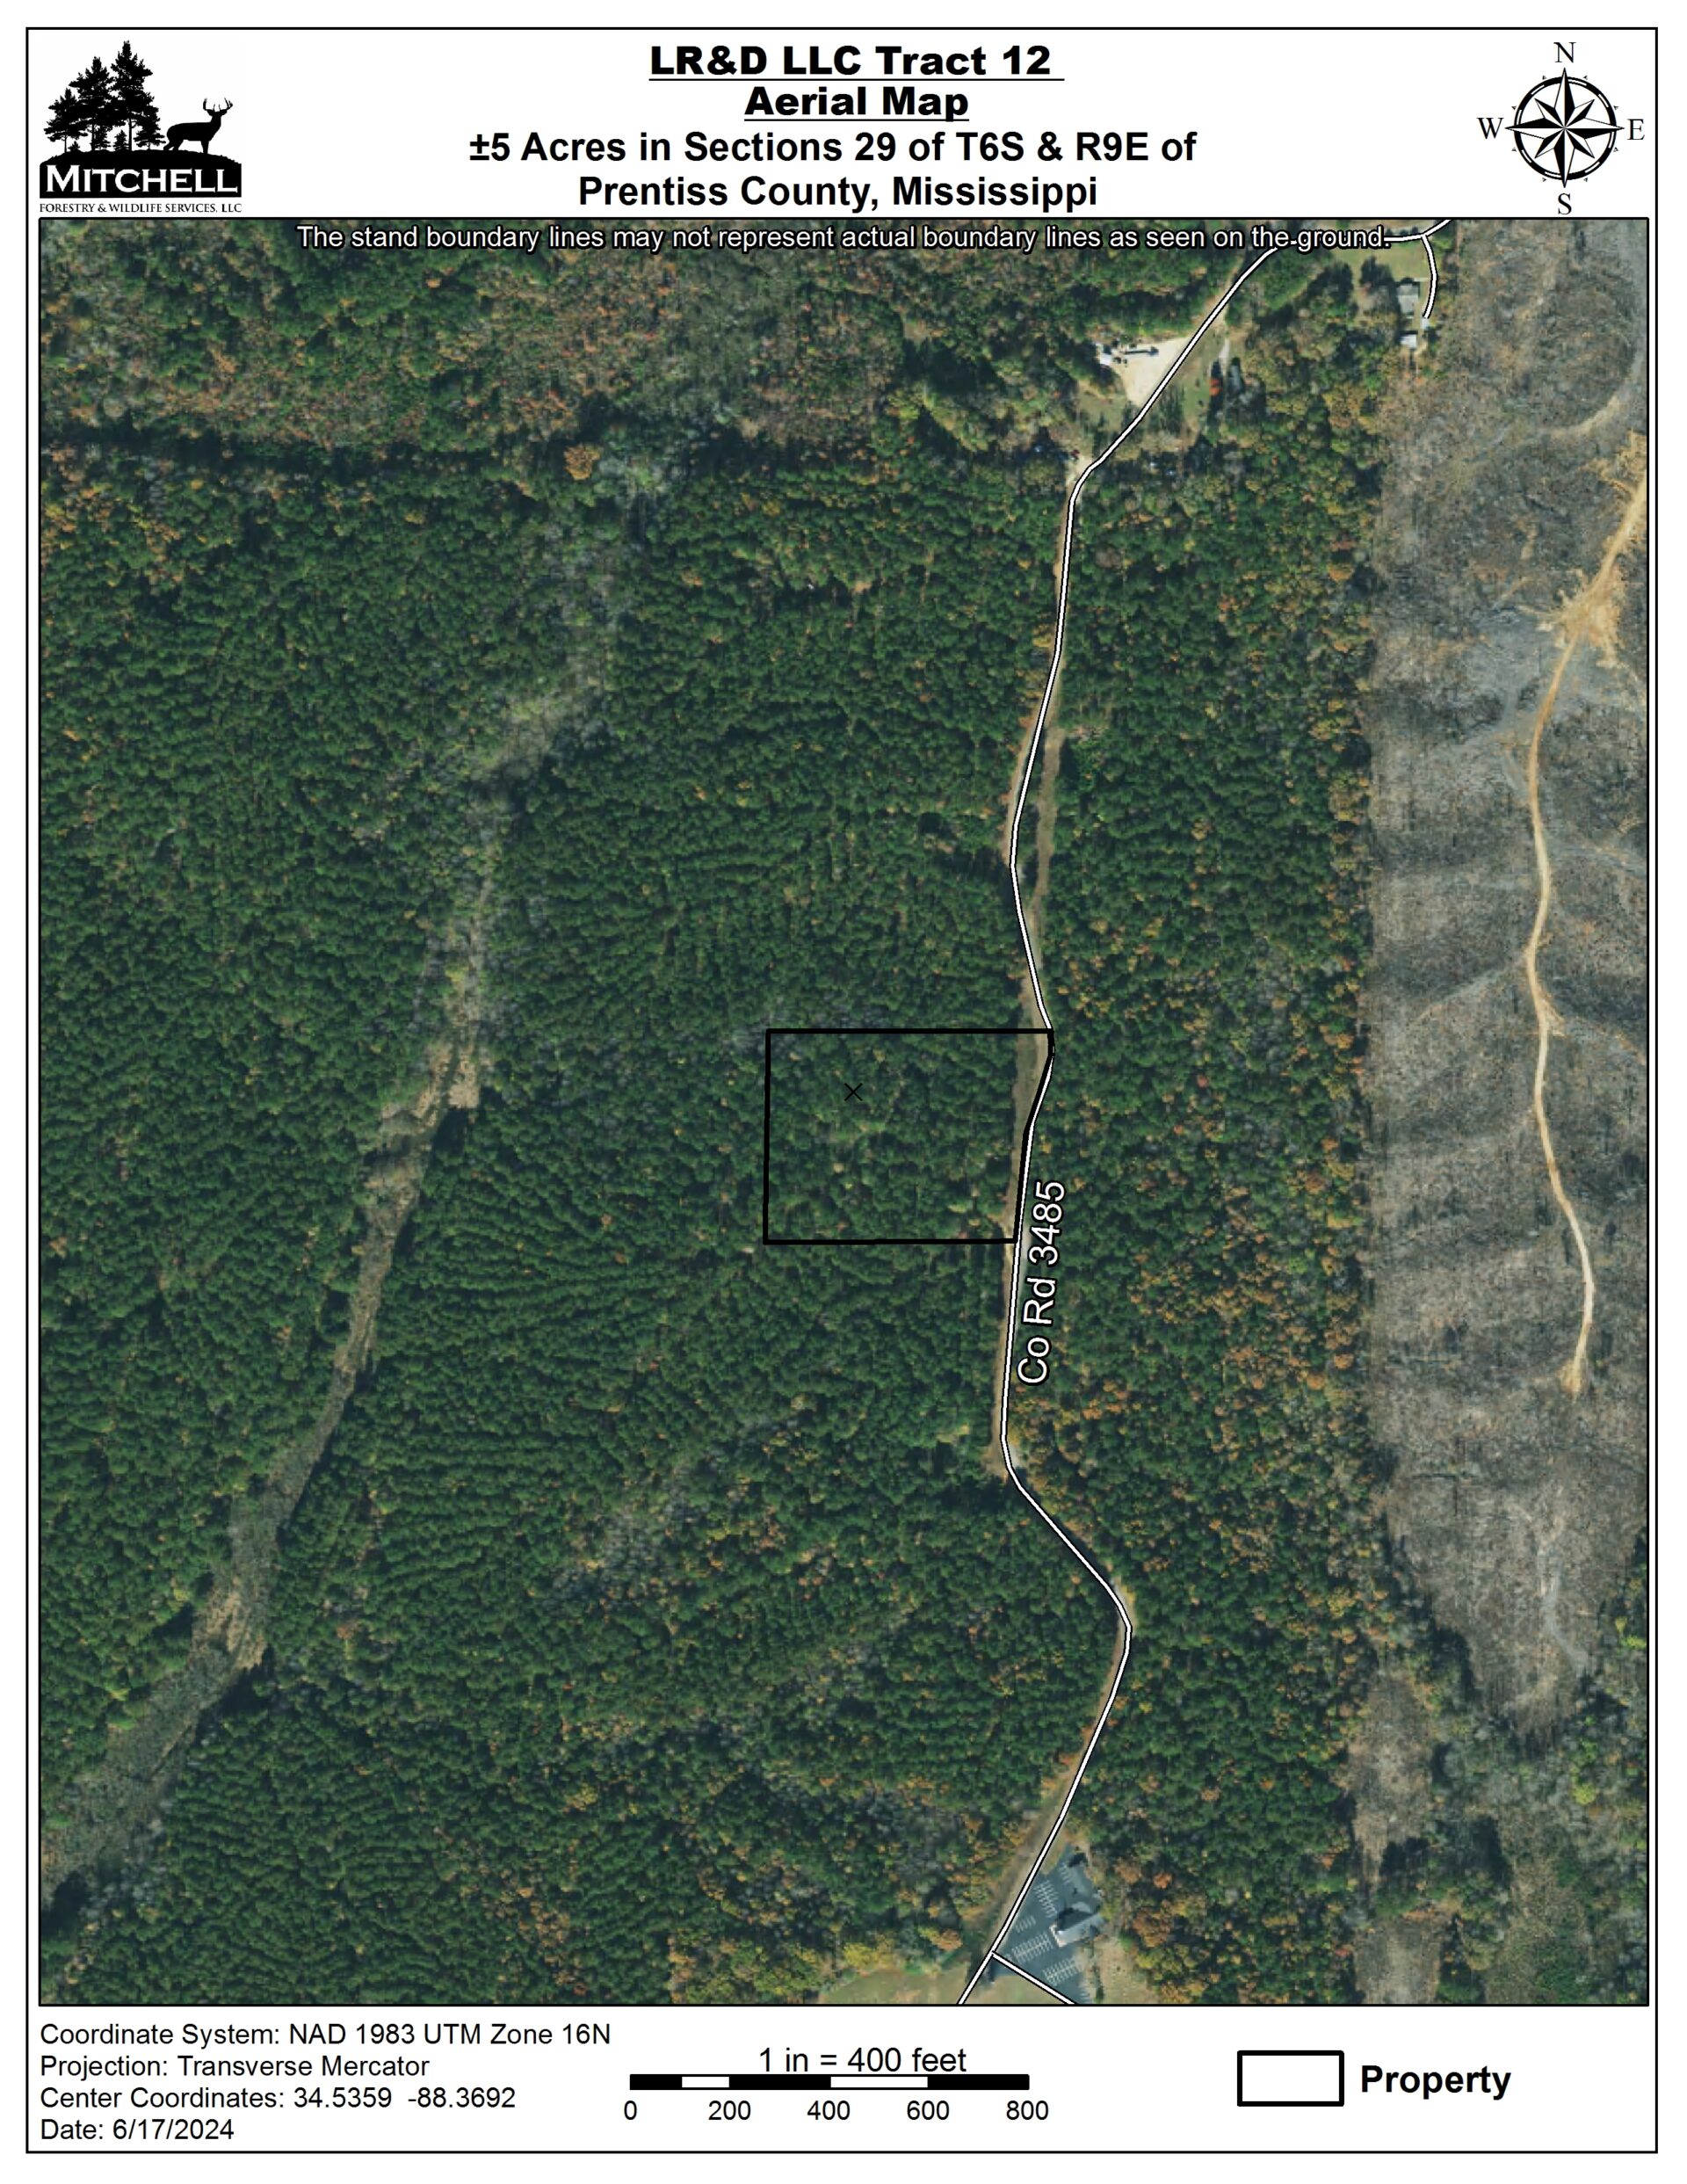 LR&D LLC Tract - Mississippi Land For Sale - Aerial Map